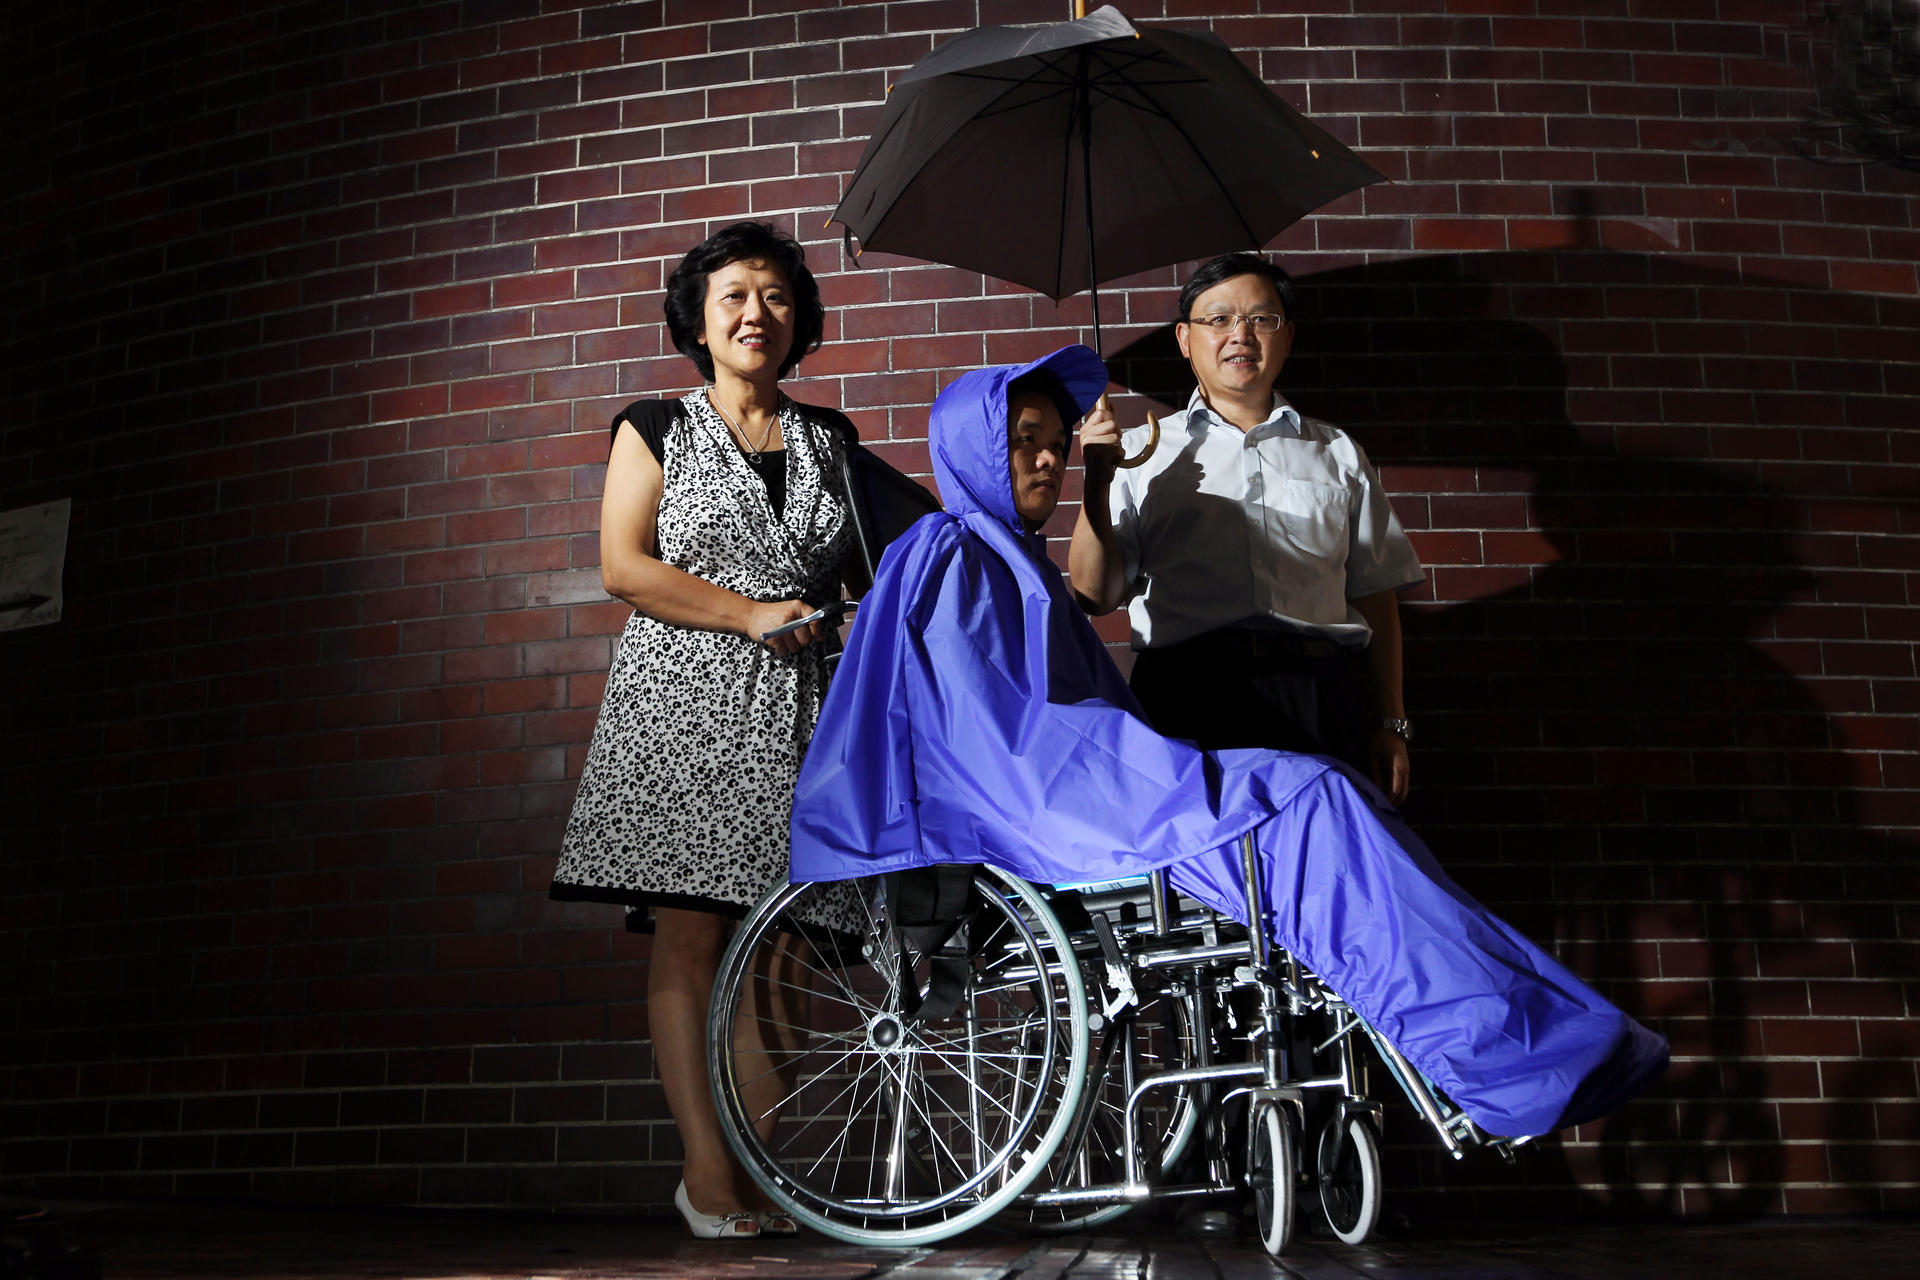 Frency Ng (left) and Patrick Hui (right) with a man wearing a raincoat designed for people in wheelchairs. Photos: Nora Tam